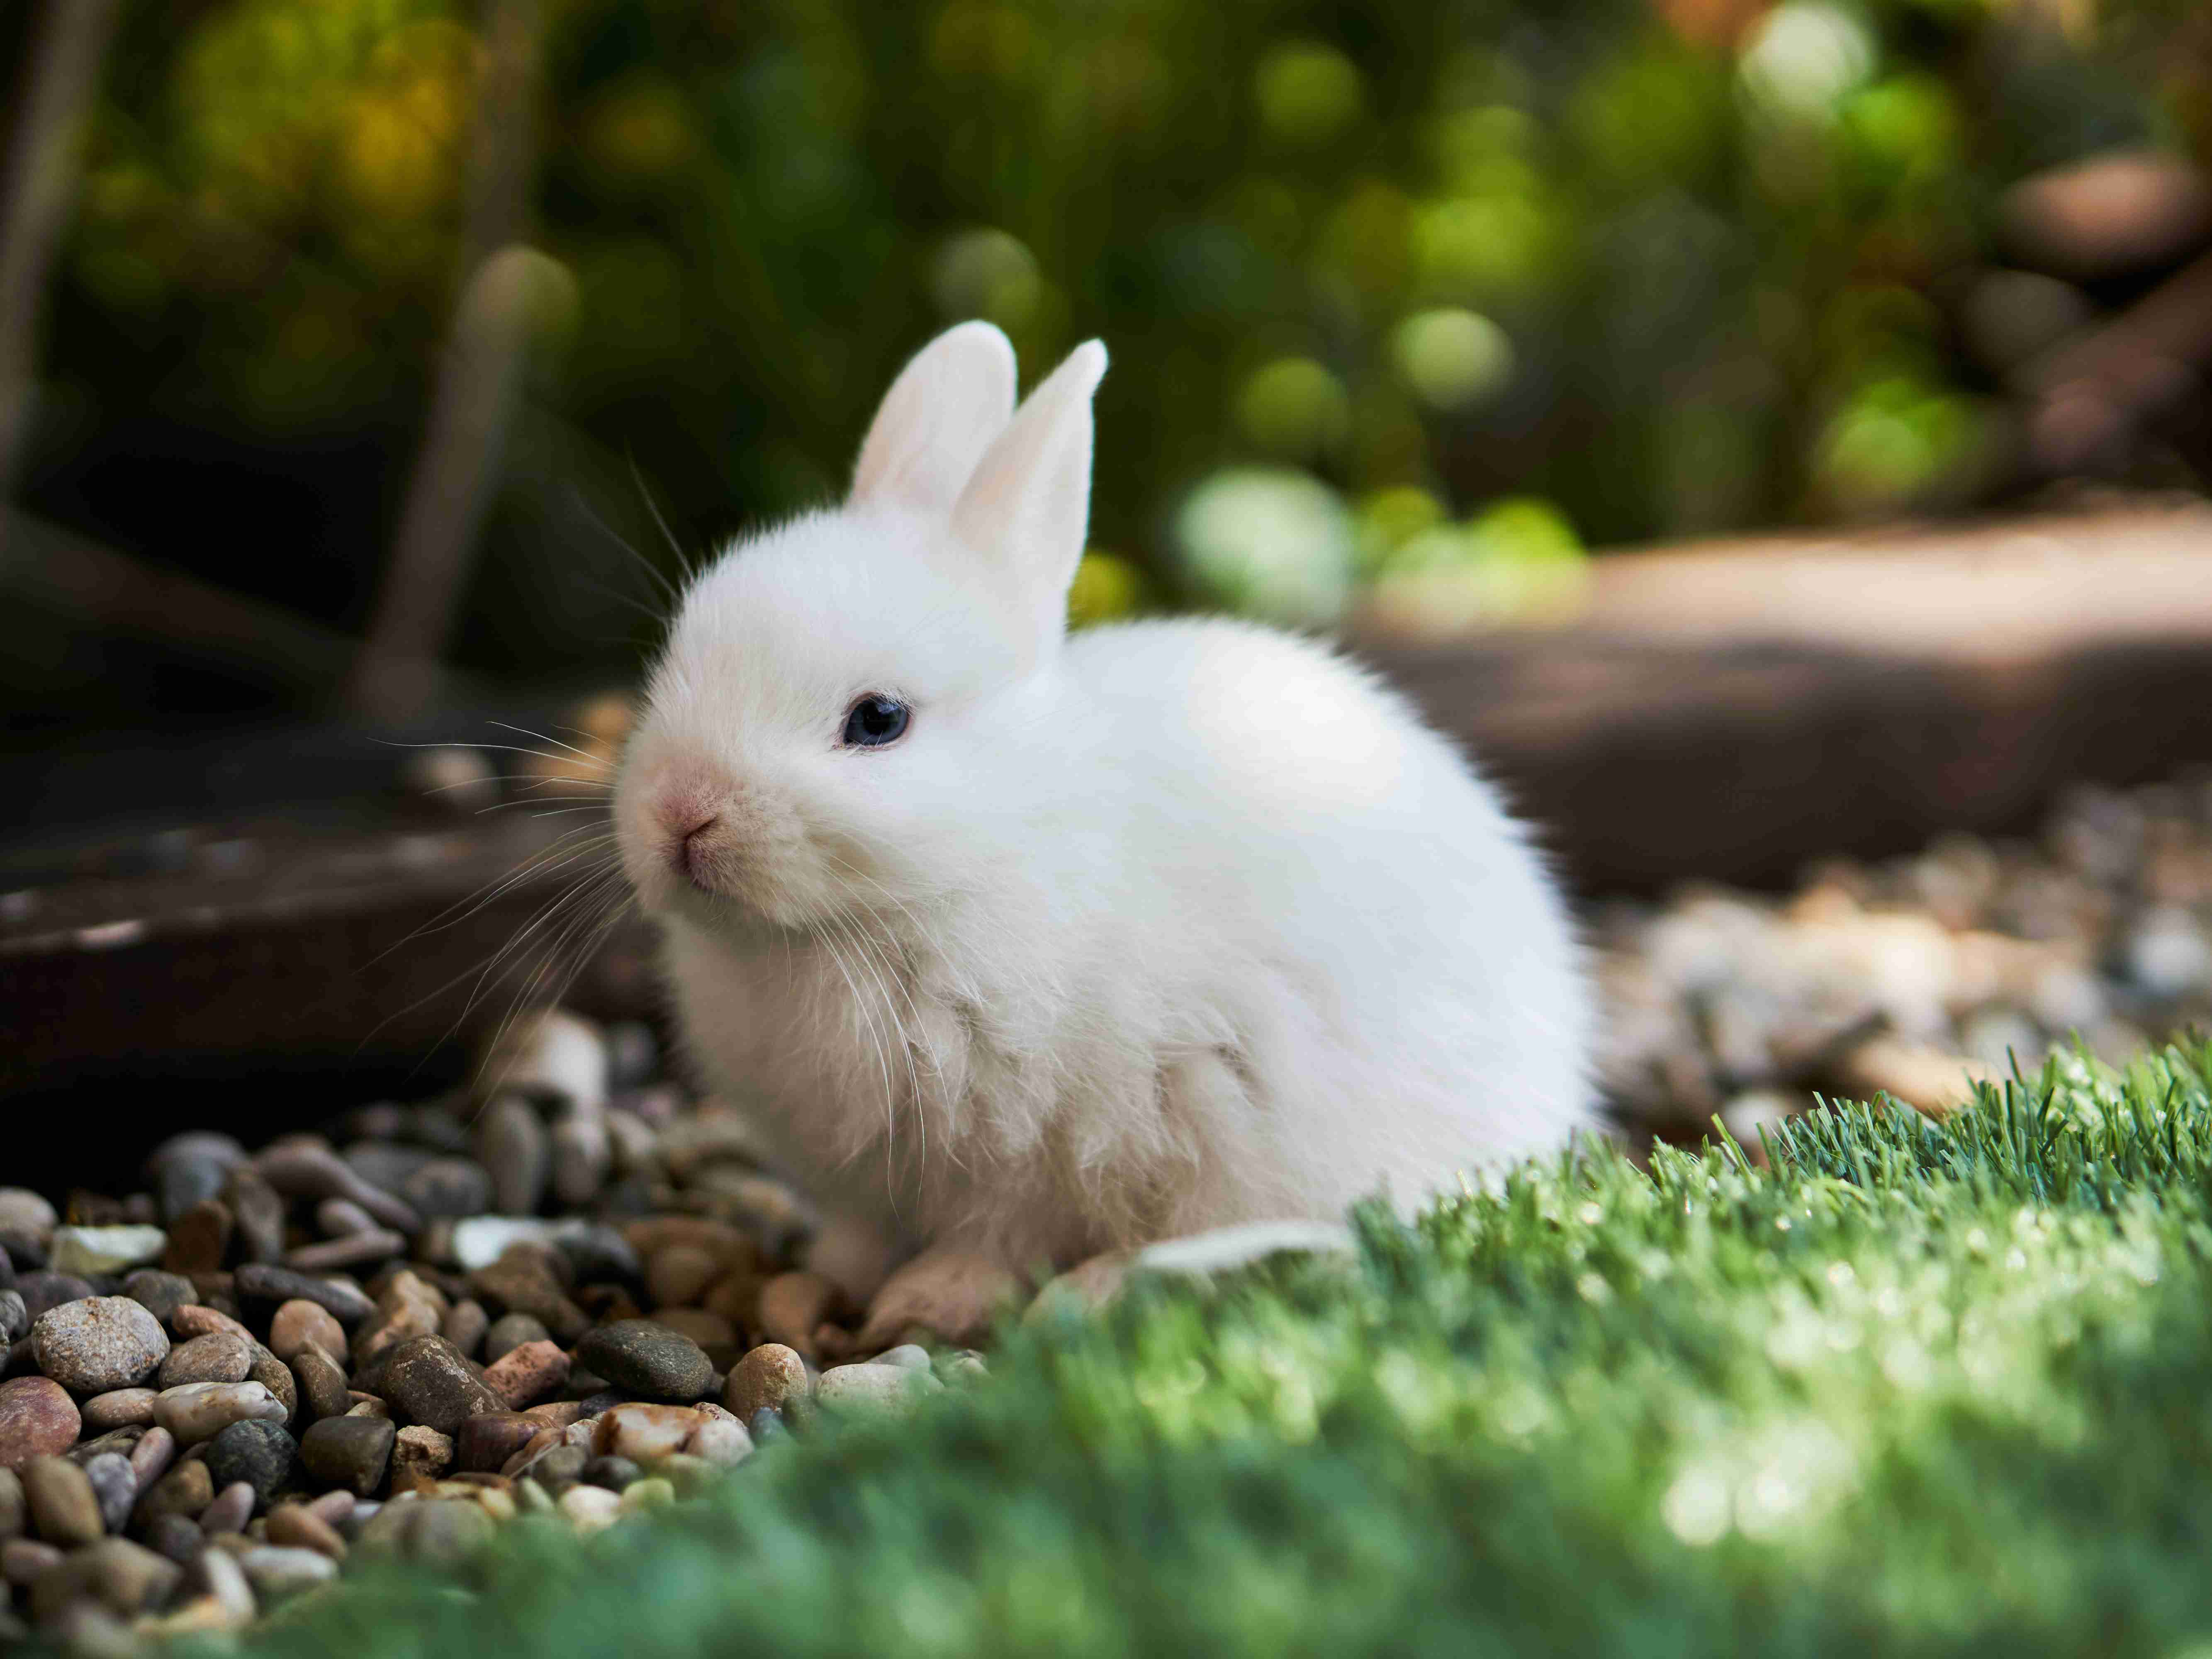 10 Tips to Keep Your Rabbit Cool and Comfortable in Hot Weather